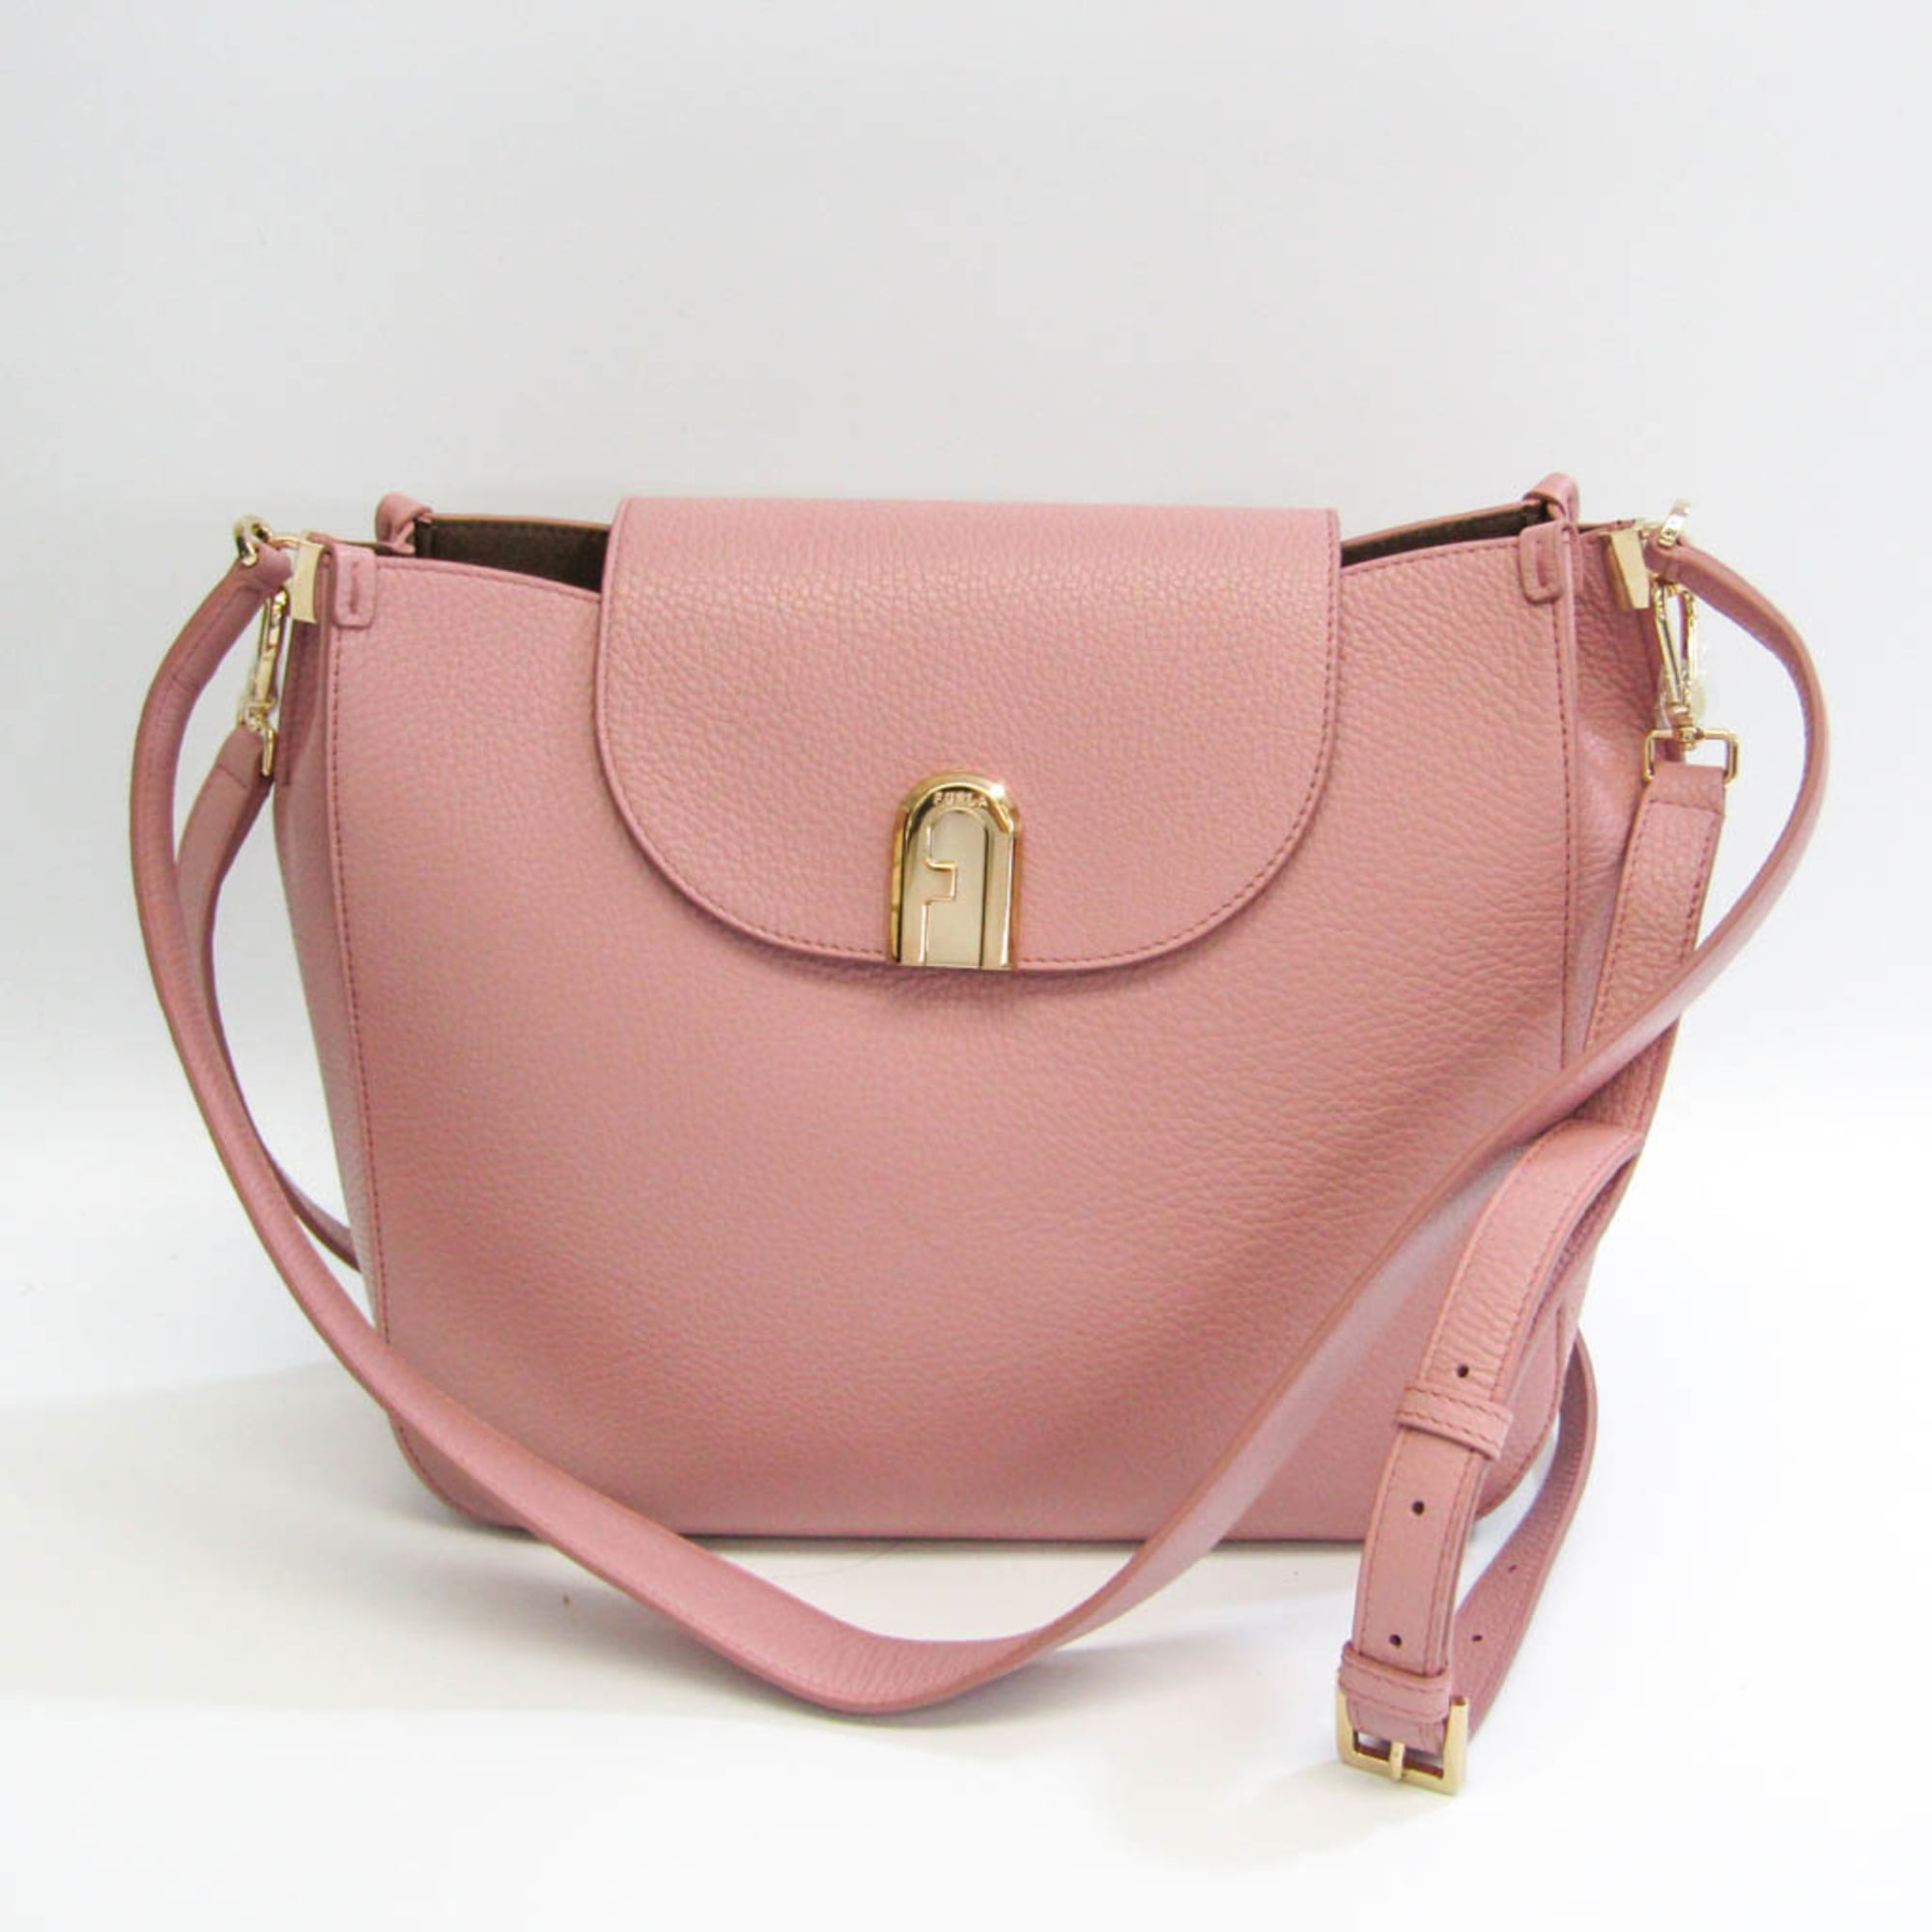 Authenticated Used Furla SLEEK M HOBO BZT4 ABR Women's Leather Shoulder Bag  Pink 